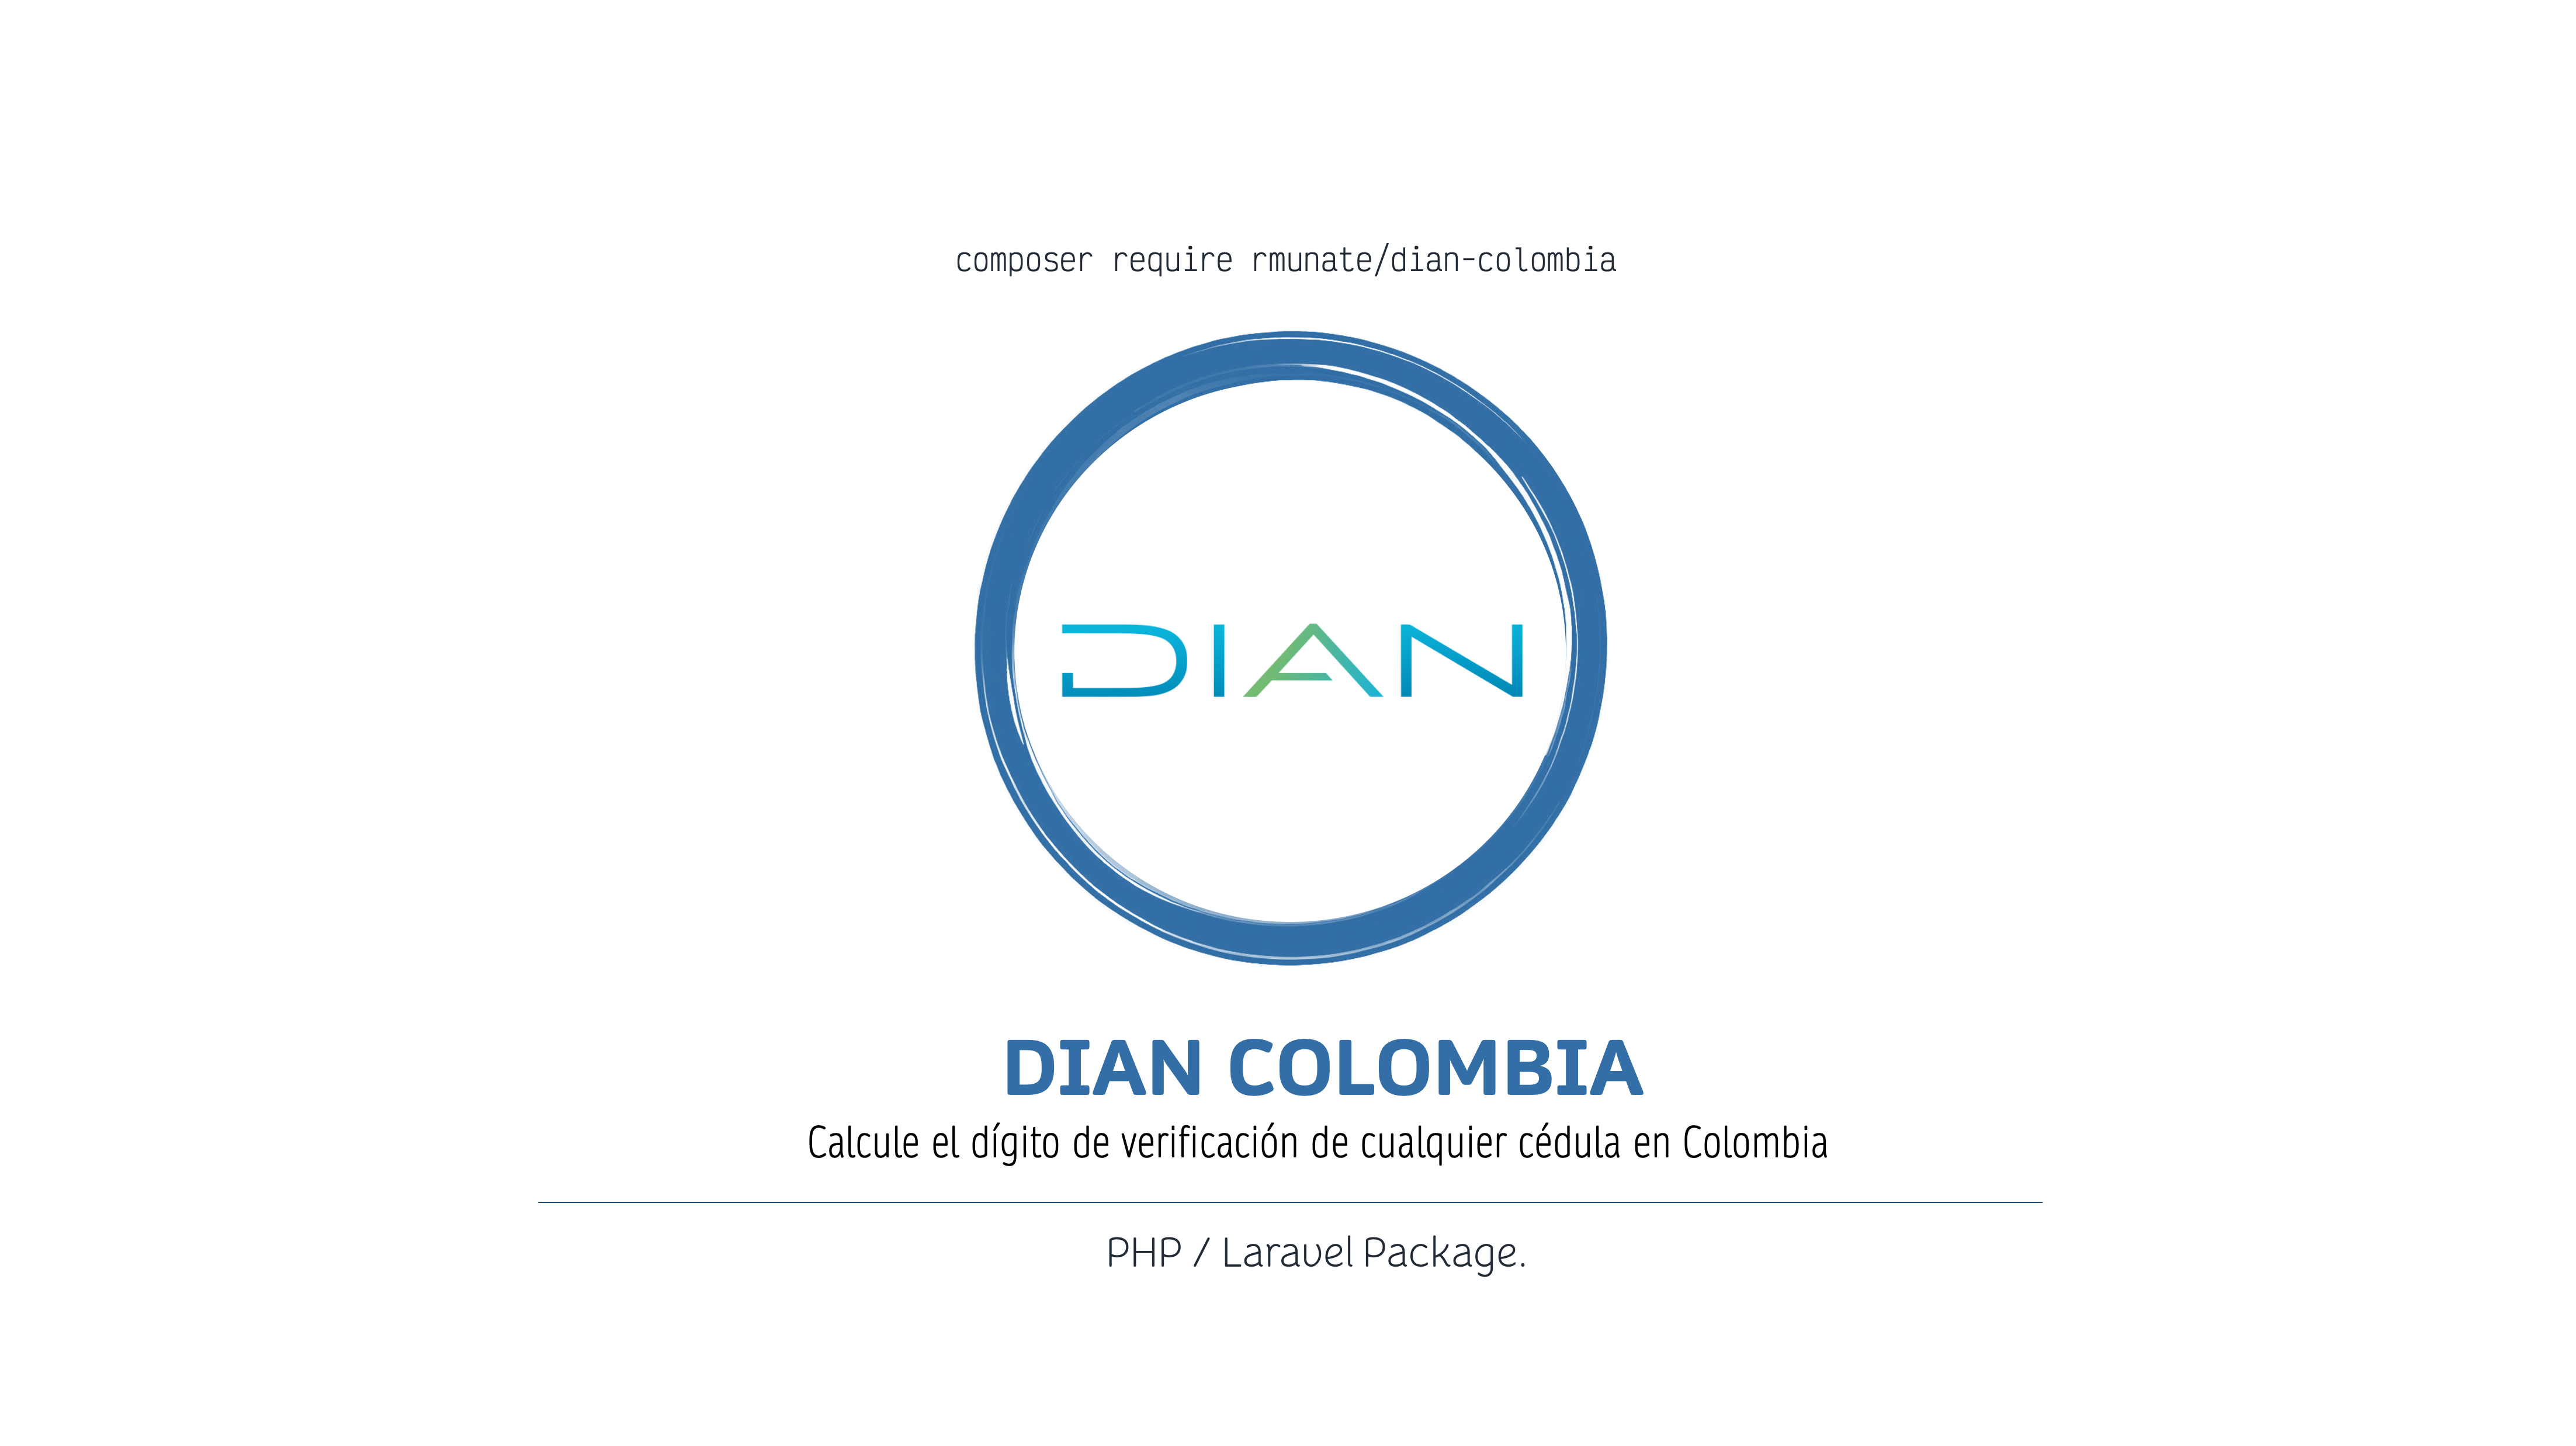 LOGO-dian-colombia